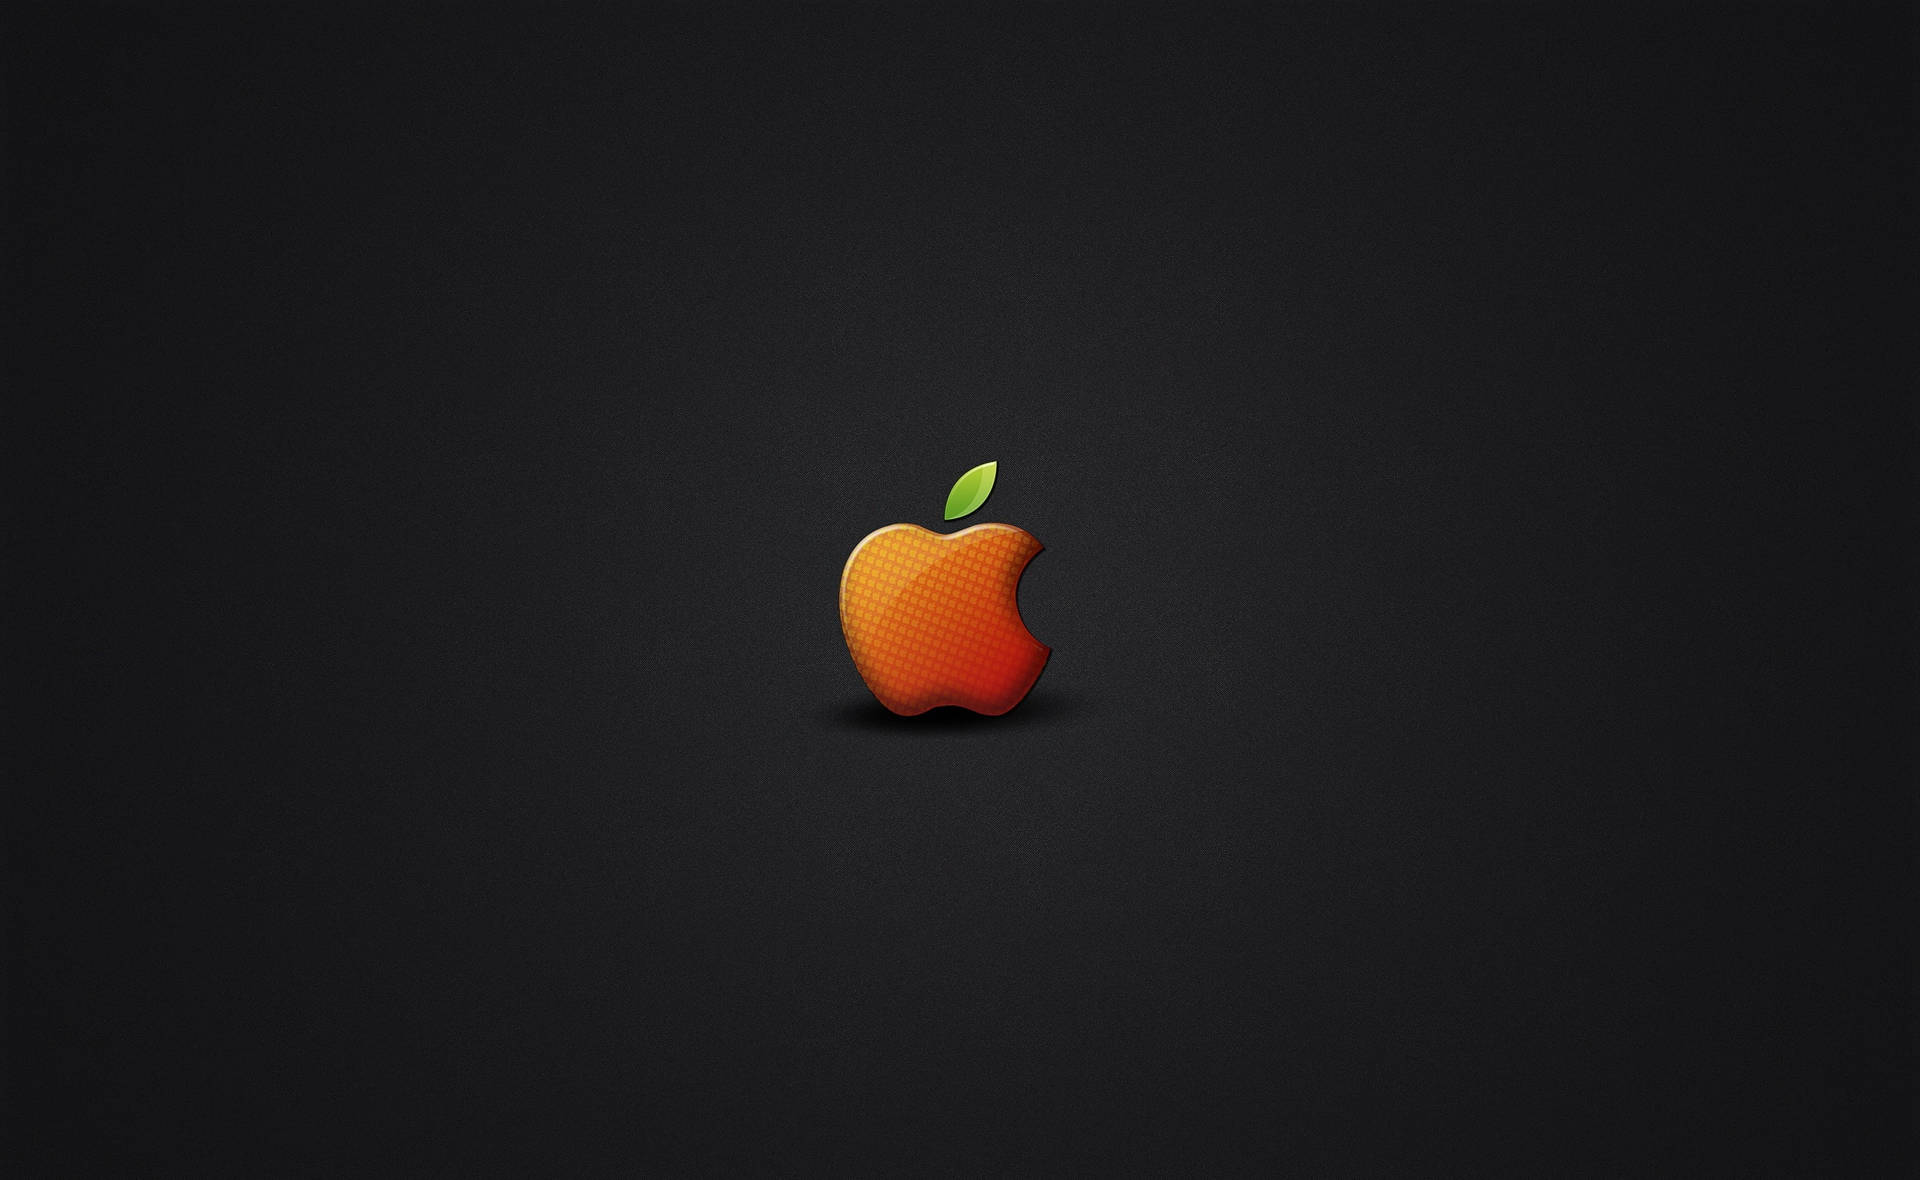 The iconic Apple logo enveloped in sleek black perfection, a symbol of sophisticated technology. Wallpaper